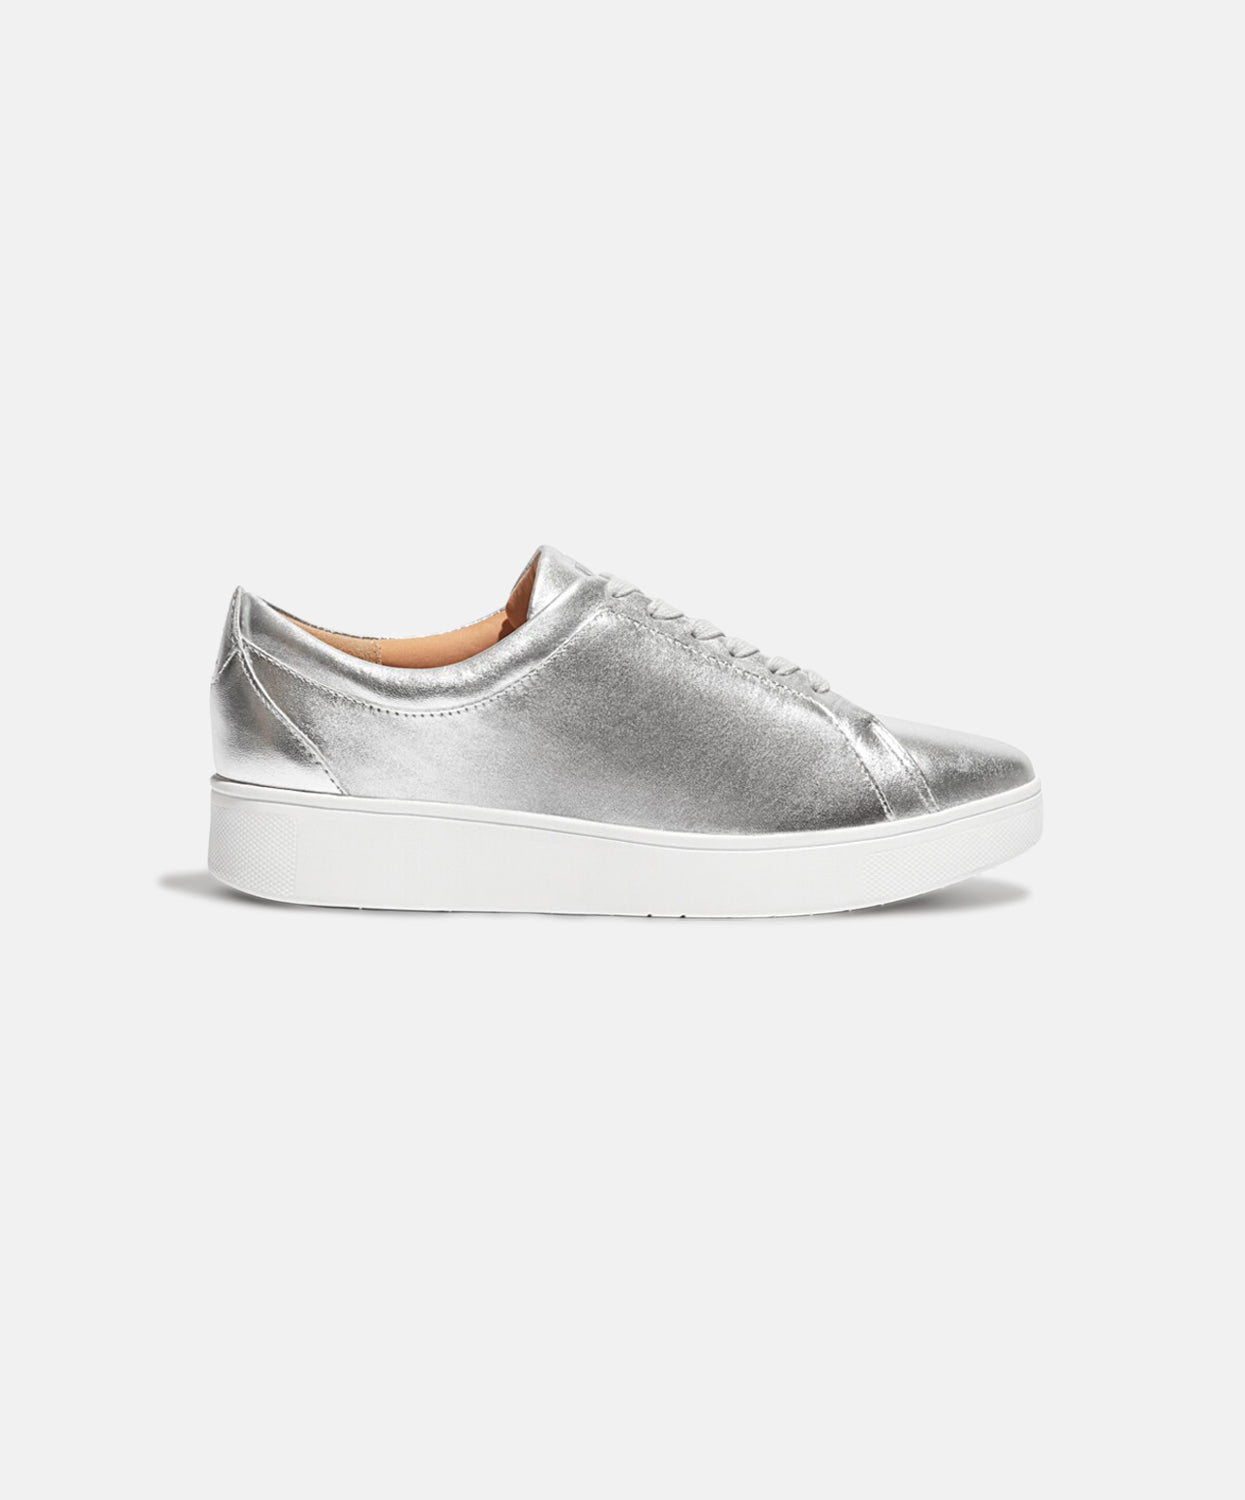 FitFlop Rally Elastic Tumbled-leather Slip-on Sneakers - Slip-on sneakers -  Boozt.com